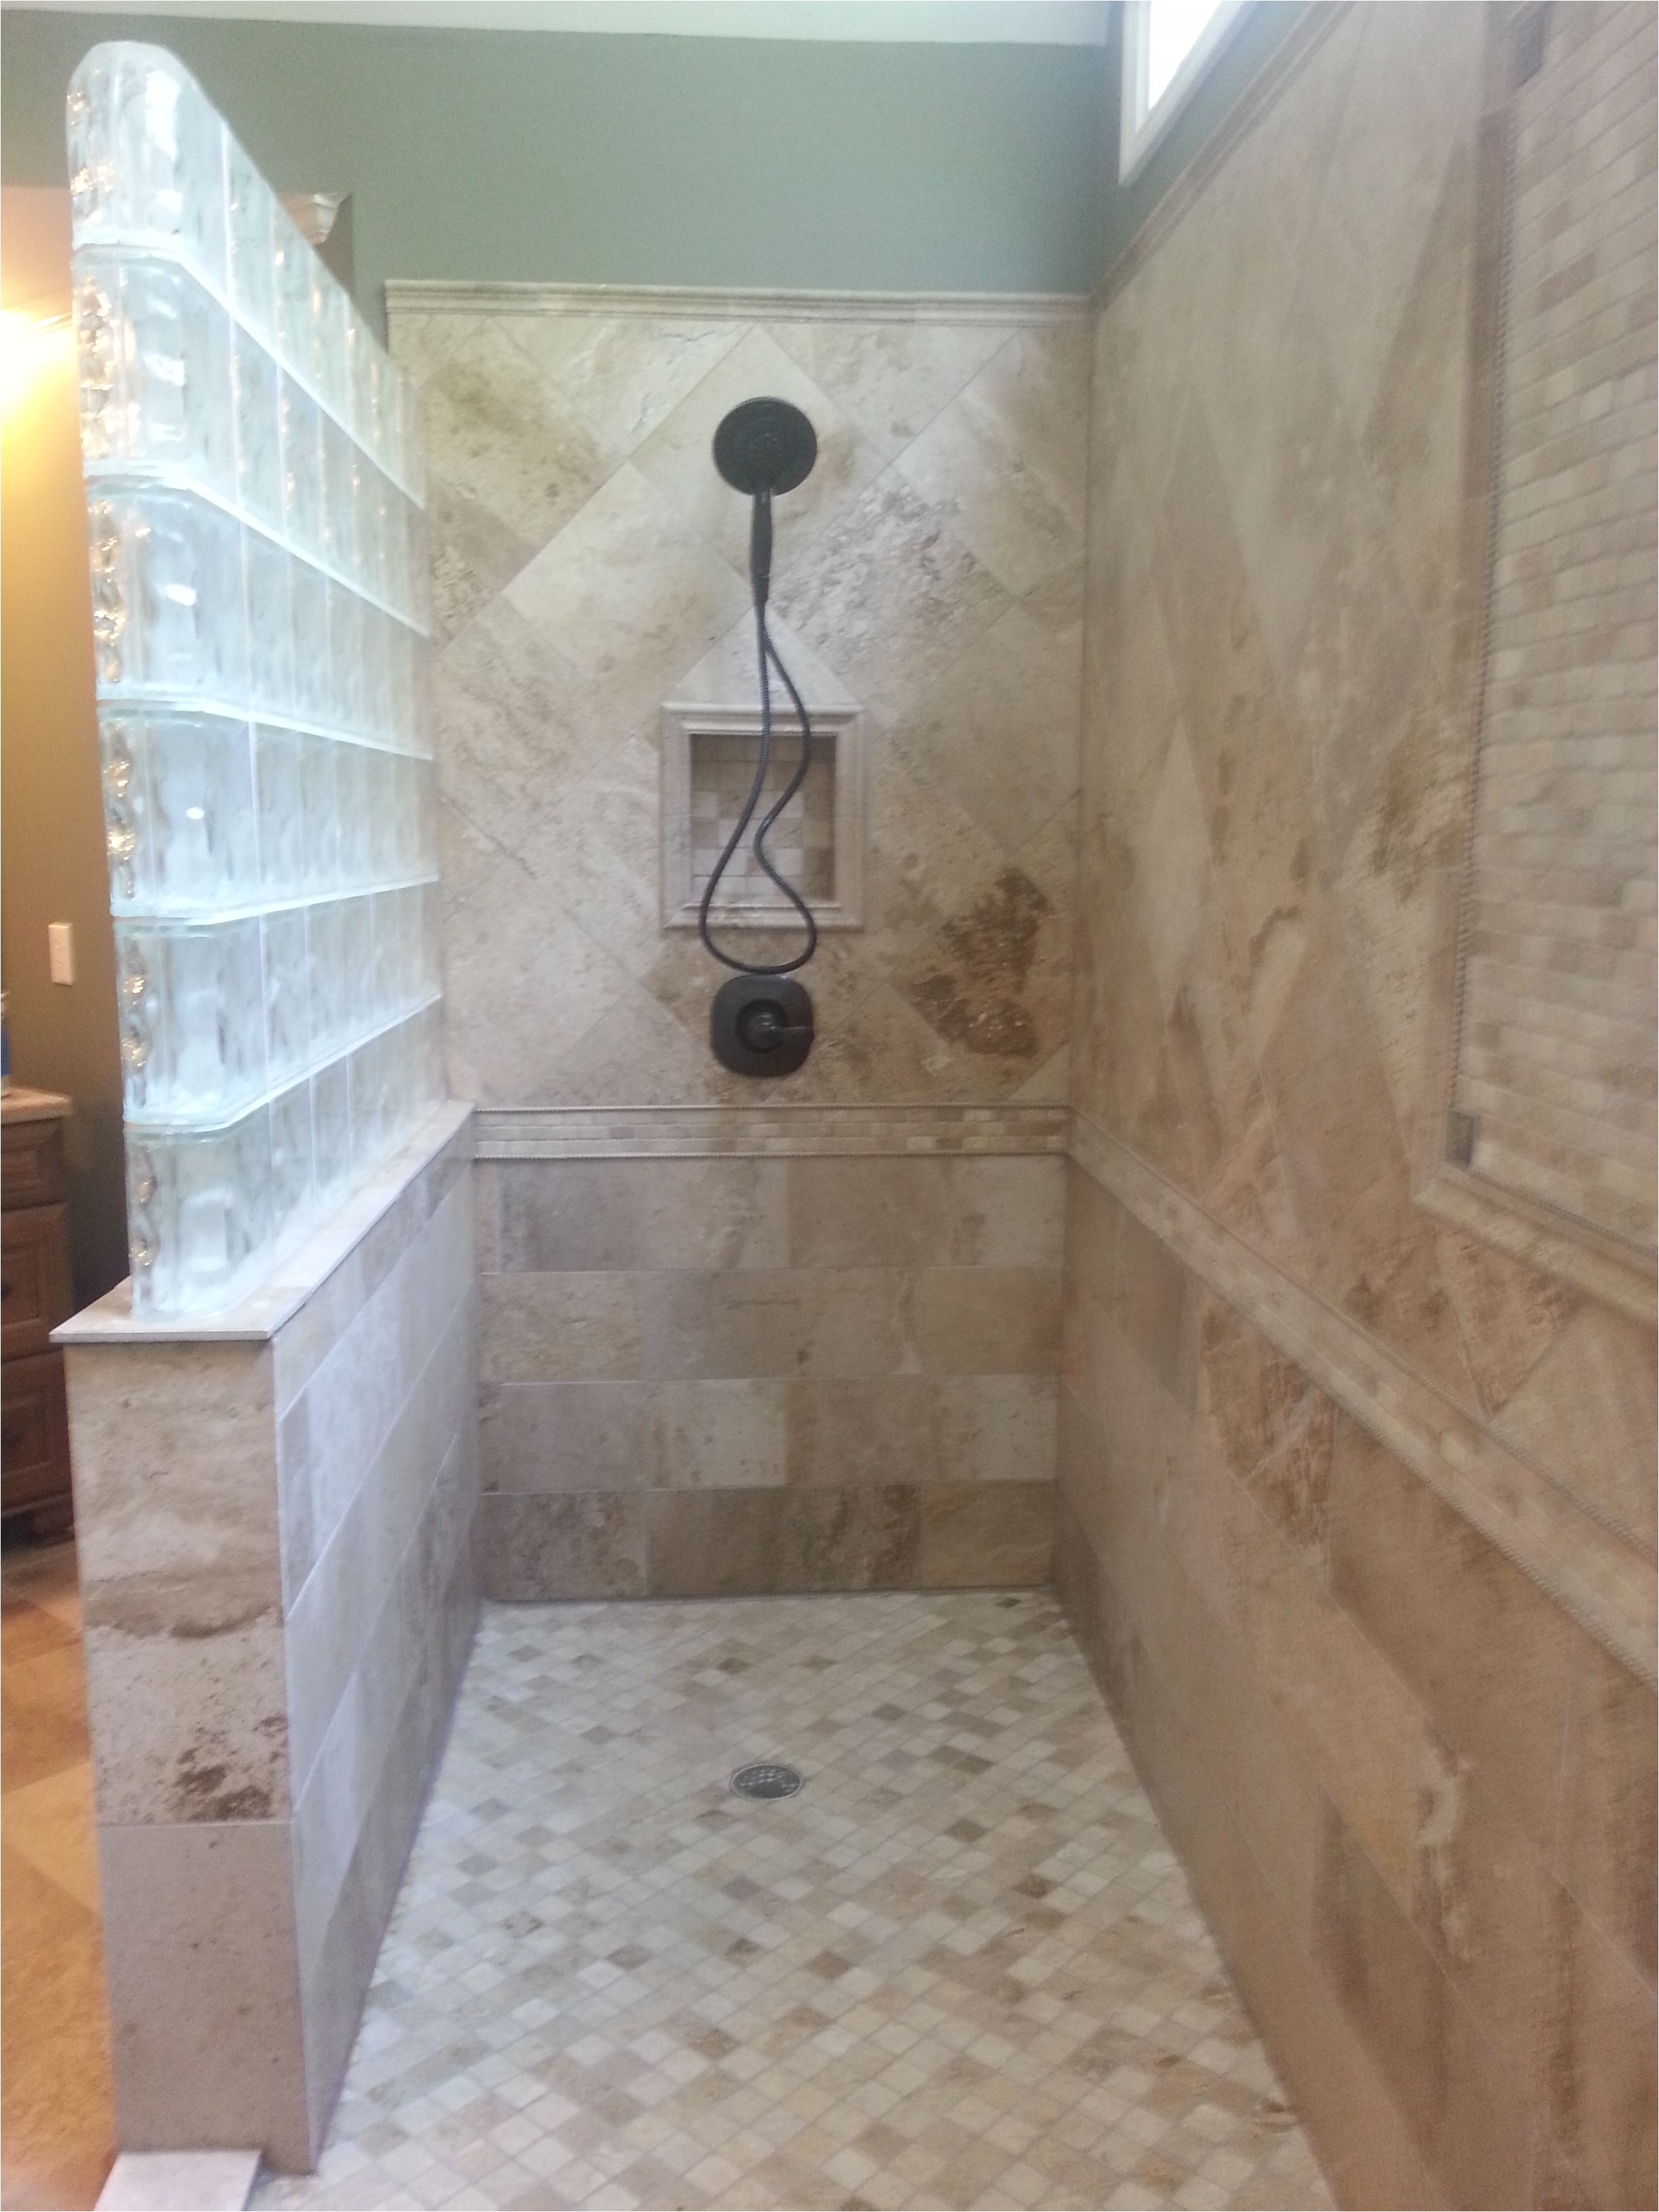 Luxurious bathroom remodel 12 ft custom tiled shower with glass block wall Travertine tile with custom niches on each side